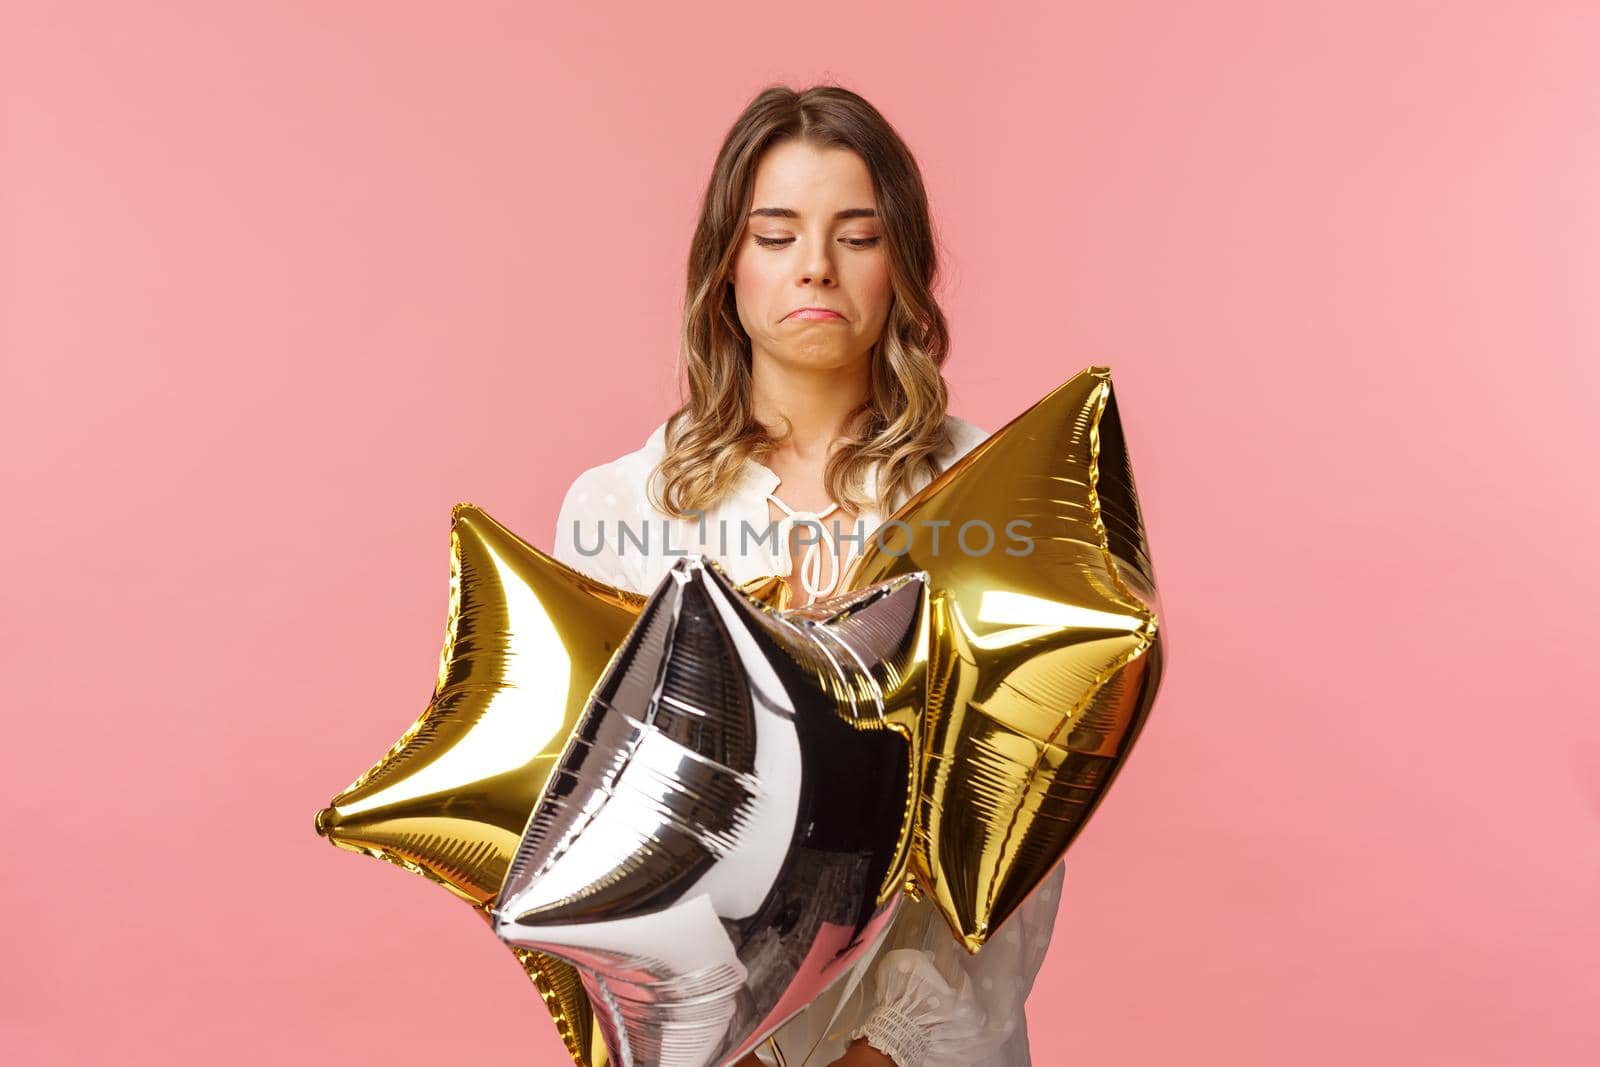 Holidays, celebration and women concept. Portrait of satisfied good-looking blond girl make not bad face, pulling lips down and nod in approval, looking at cool star-shaped balloons.